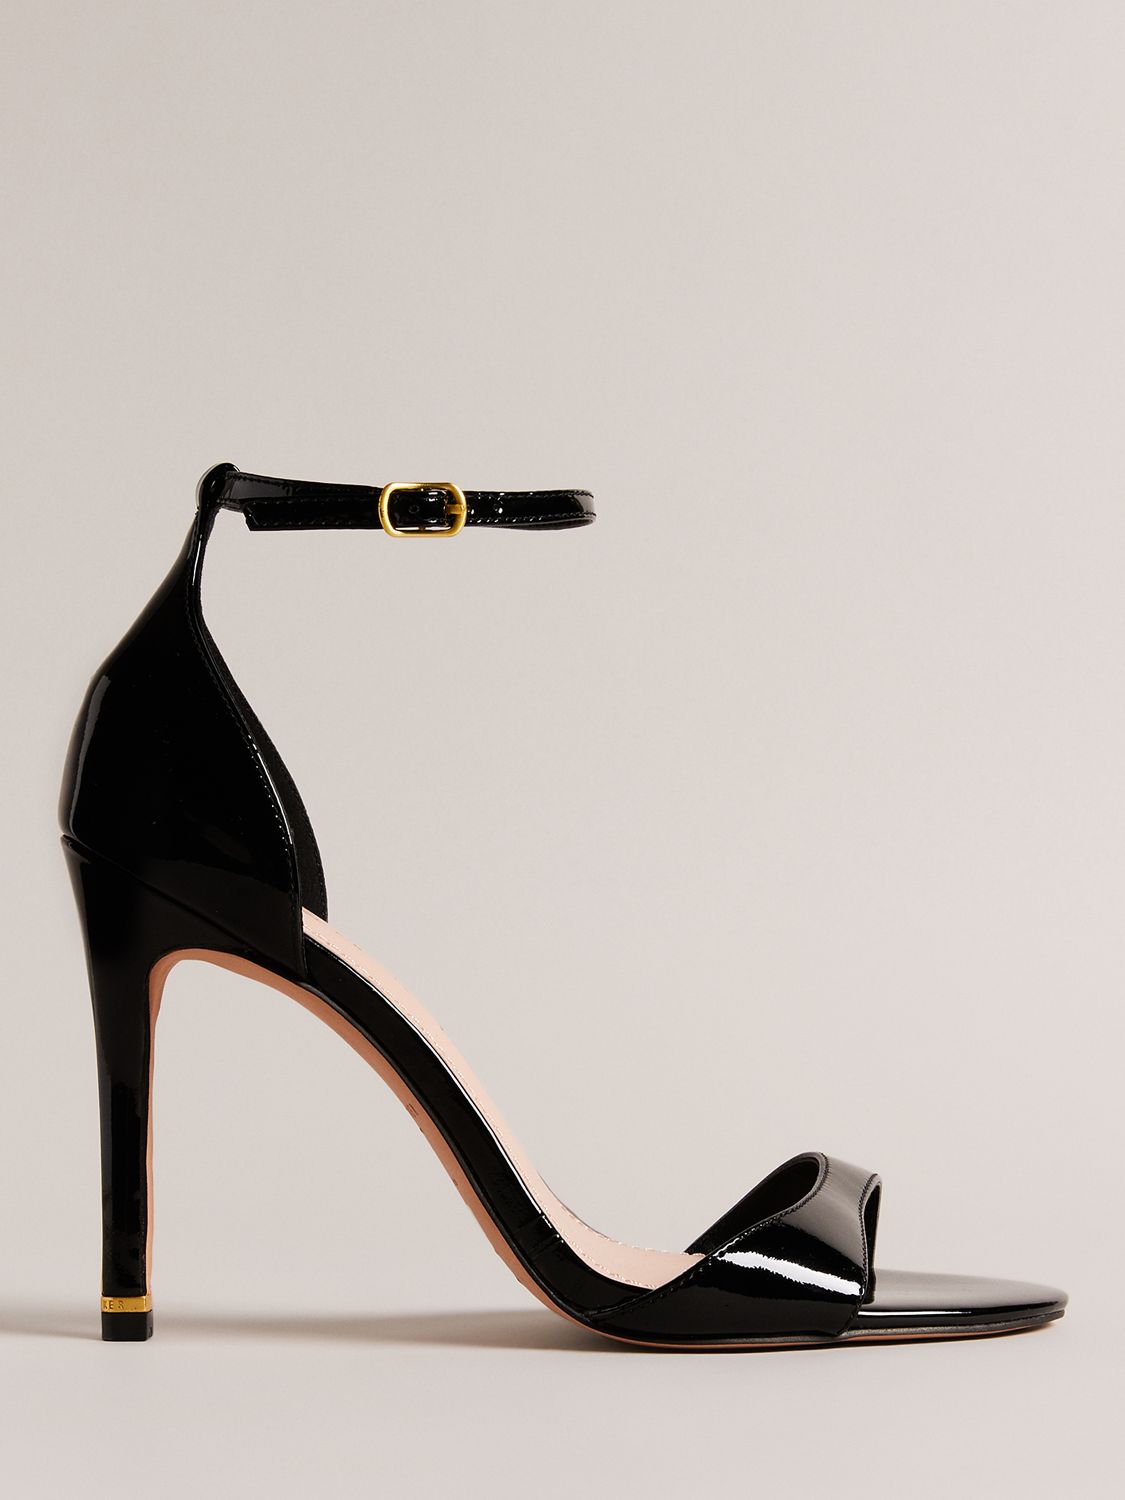 Ted Baker Helmia High Heel Leather Sandals, Black Patent at John Lewis ...